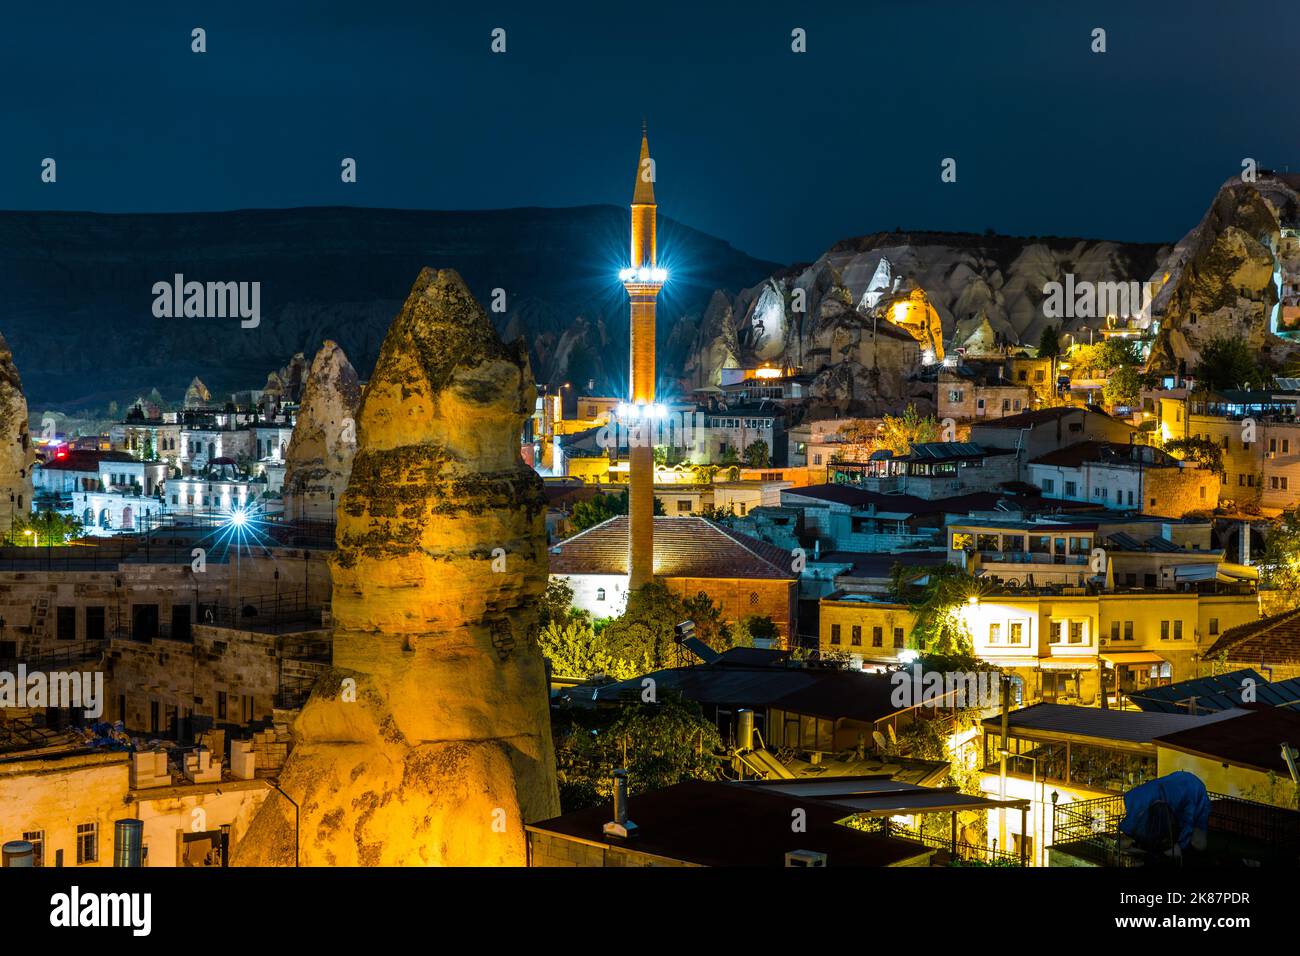 Night view of Goreme, Turkey. Goreme is known for its fairy chimneys, eroded rock formations, many of which were hollowed out in the Middle Ages to cr Stock Photo